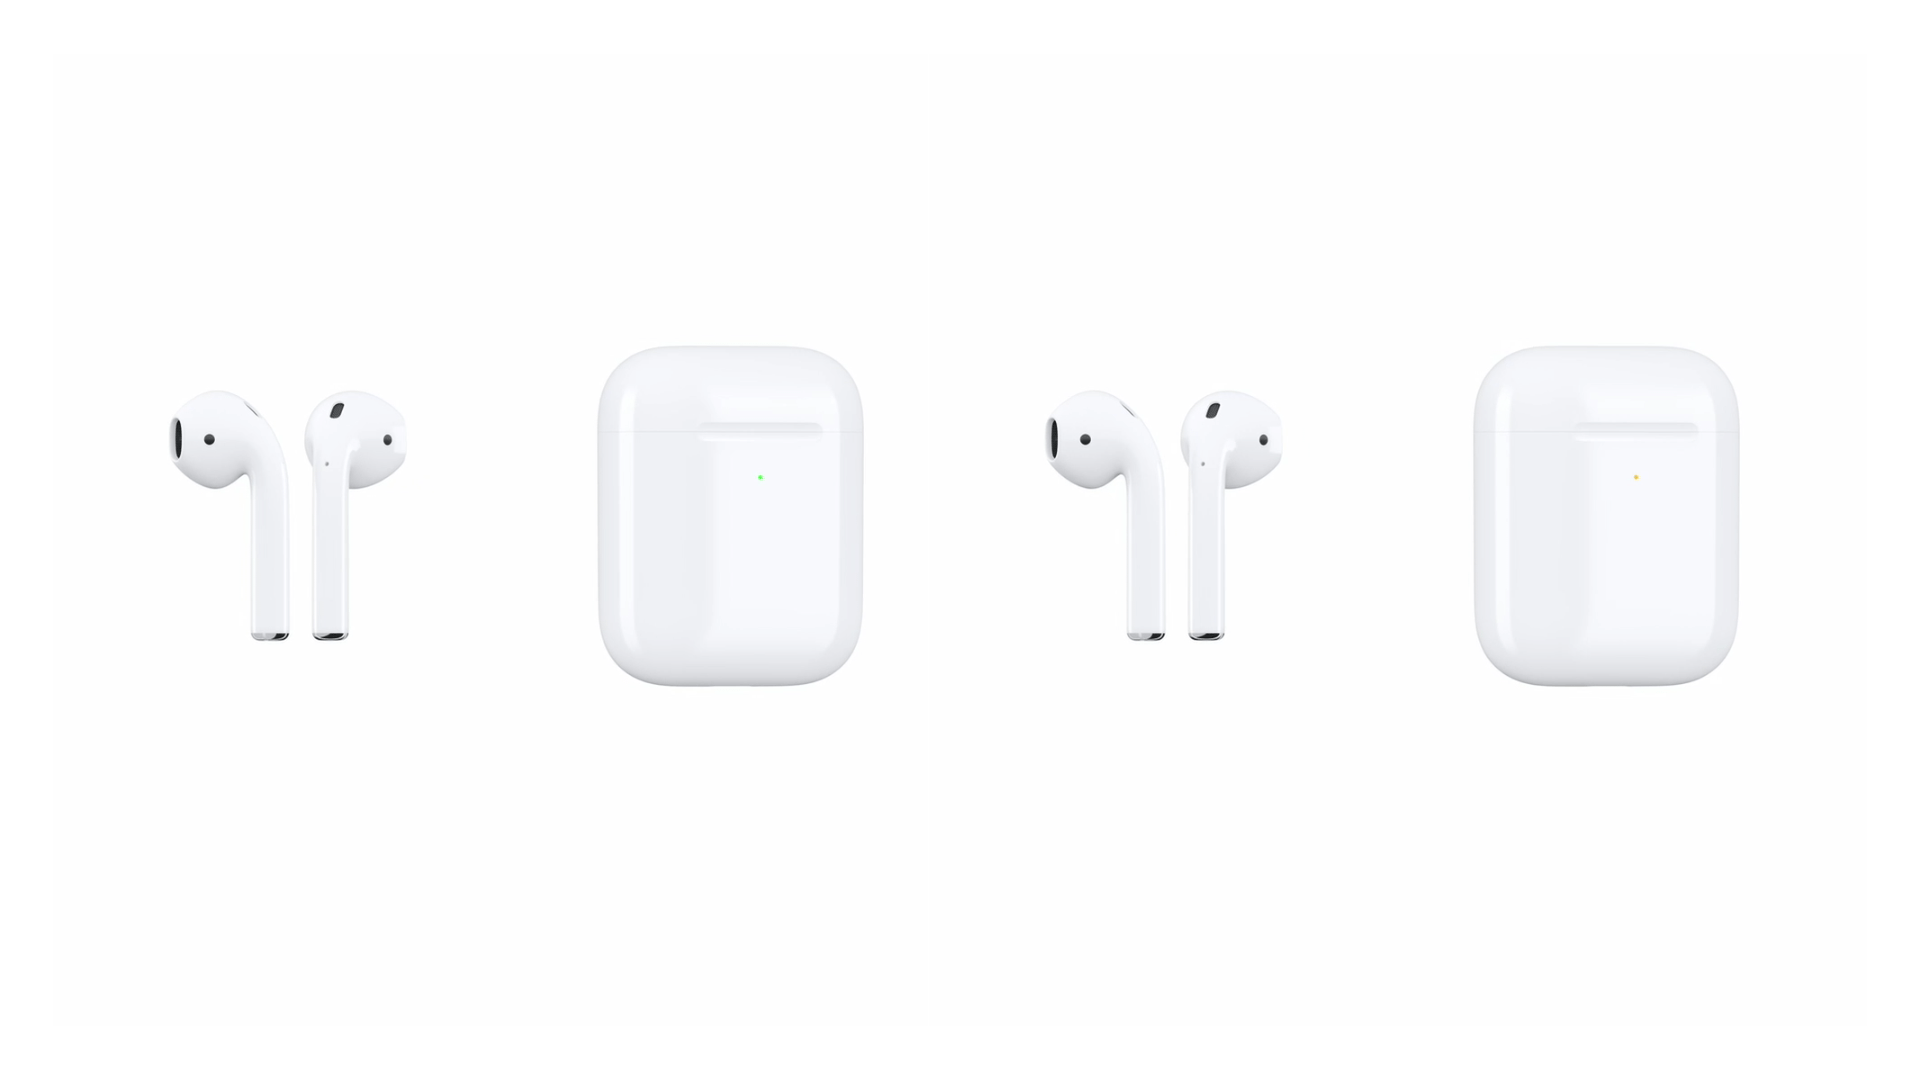 AirPods 2 could Fully Charge Wirelessly in just 15 Minutes, According to New Leak